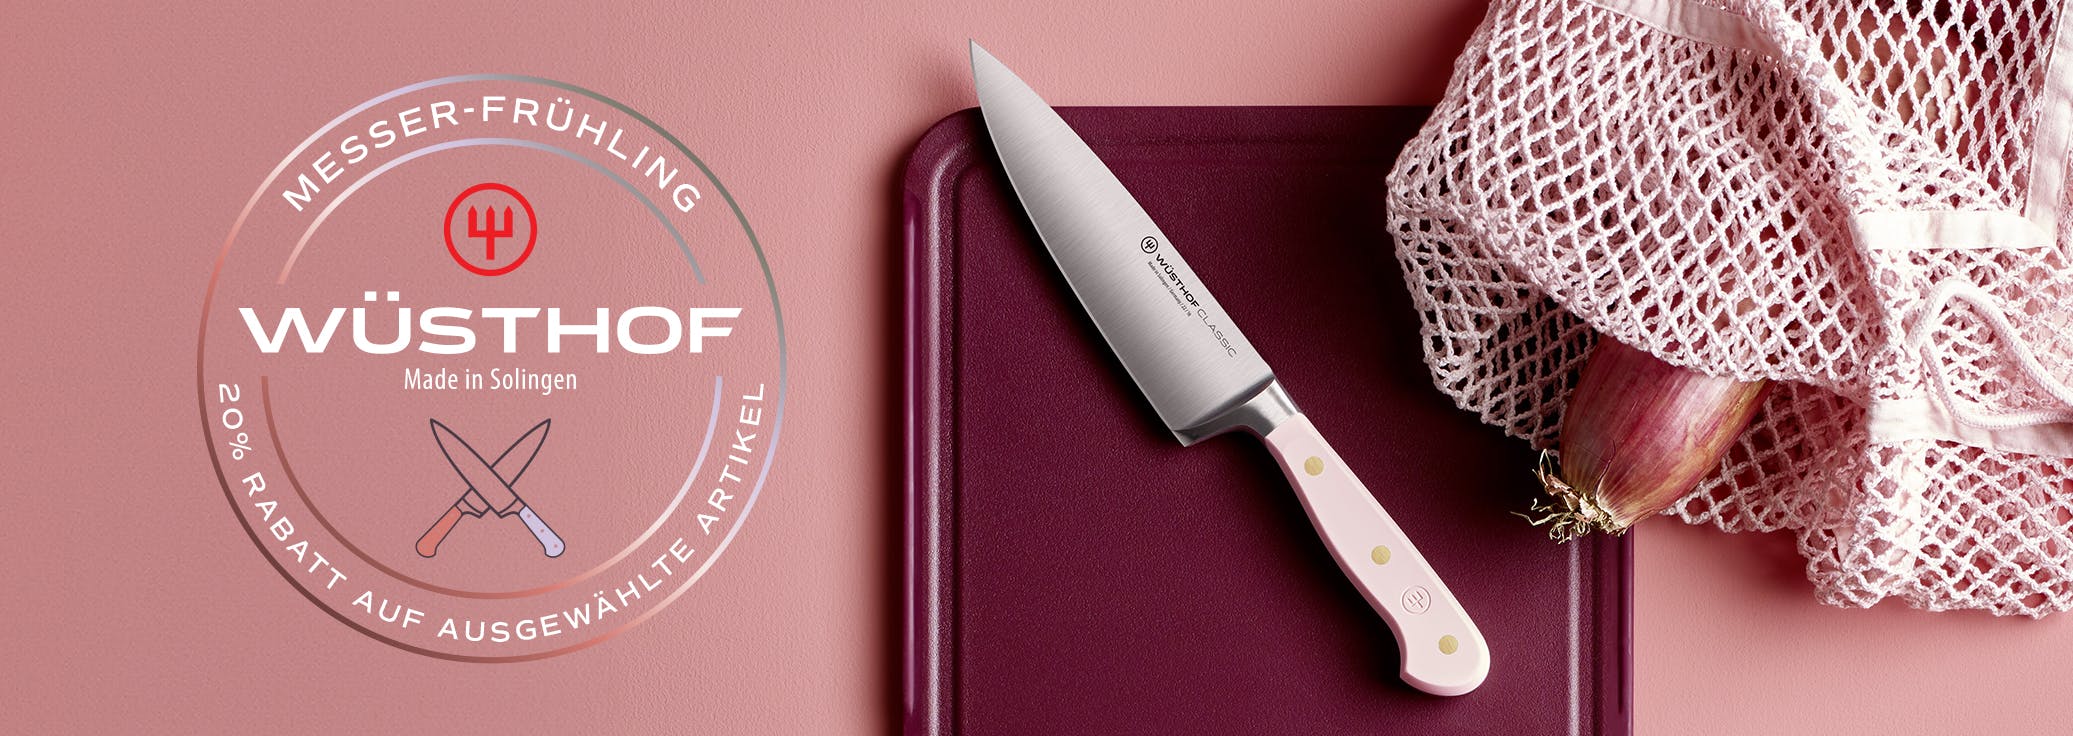 Coral peach chef's knife 6"